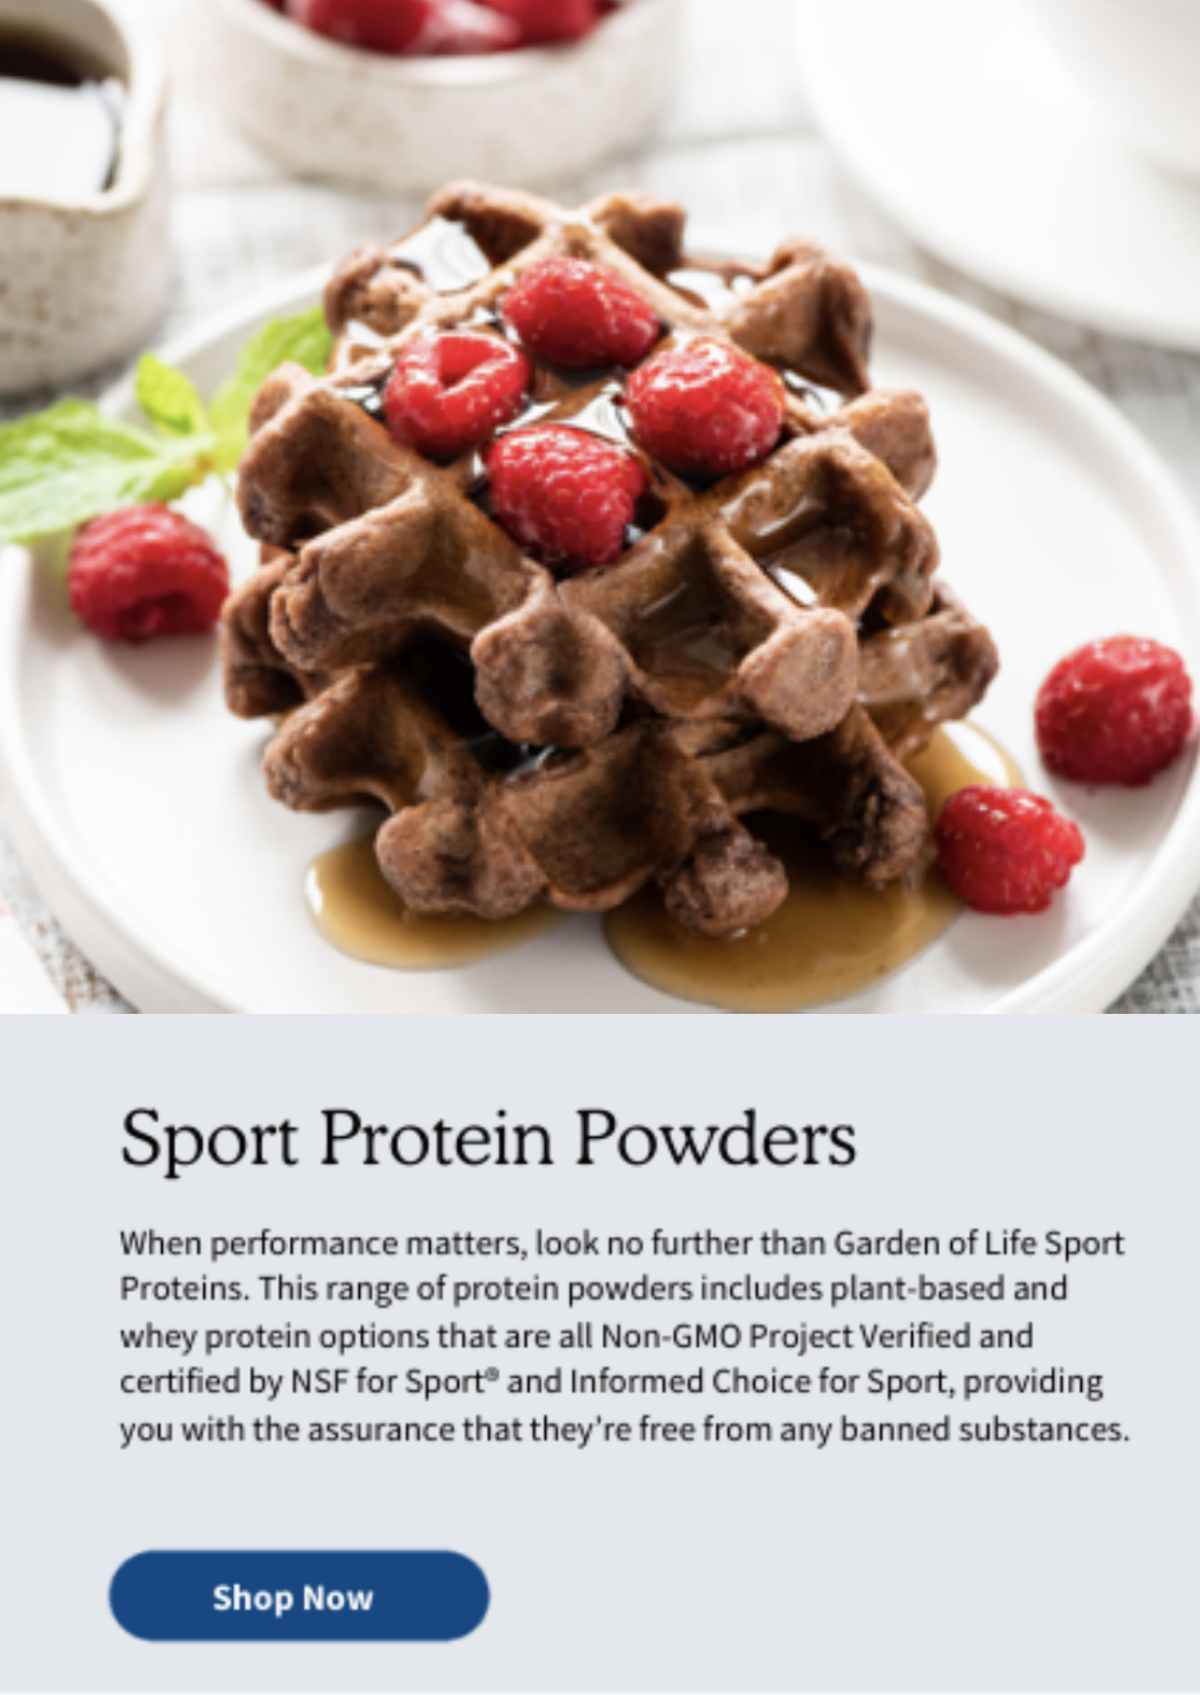 Sport Protein Powders. When performance matters, look no further than Garden of Life Sport Proteins. This range of protein powders includes plant-based and whey protein options that are all Non-GMO Project Verified and certified by NSF for Sport® and Informed Choice for Sport, providing you with the assurance that they’re free from any banned substances.